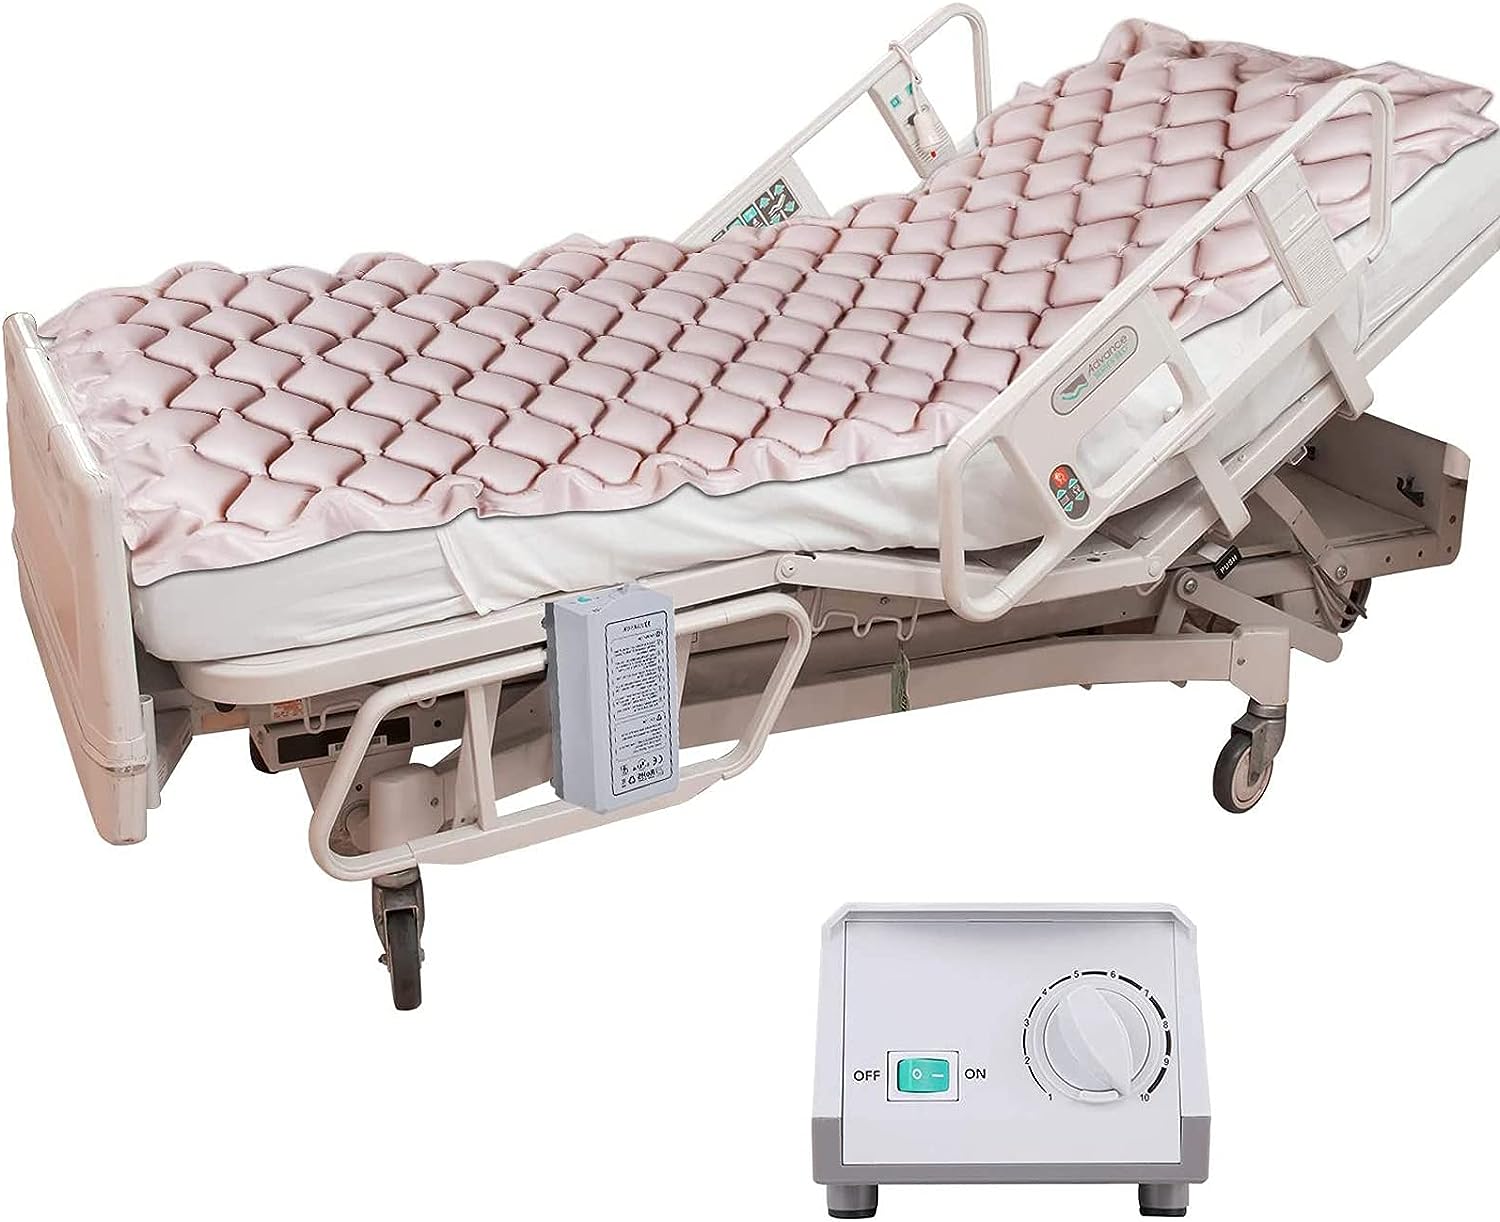 Alternating Pressure Mattress Medical Air Mattress with Inflatable Pad & Electric Pump System for Ulcer Bedsore Prevention and Pressure Sore Treatment